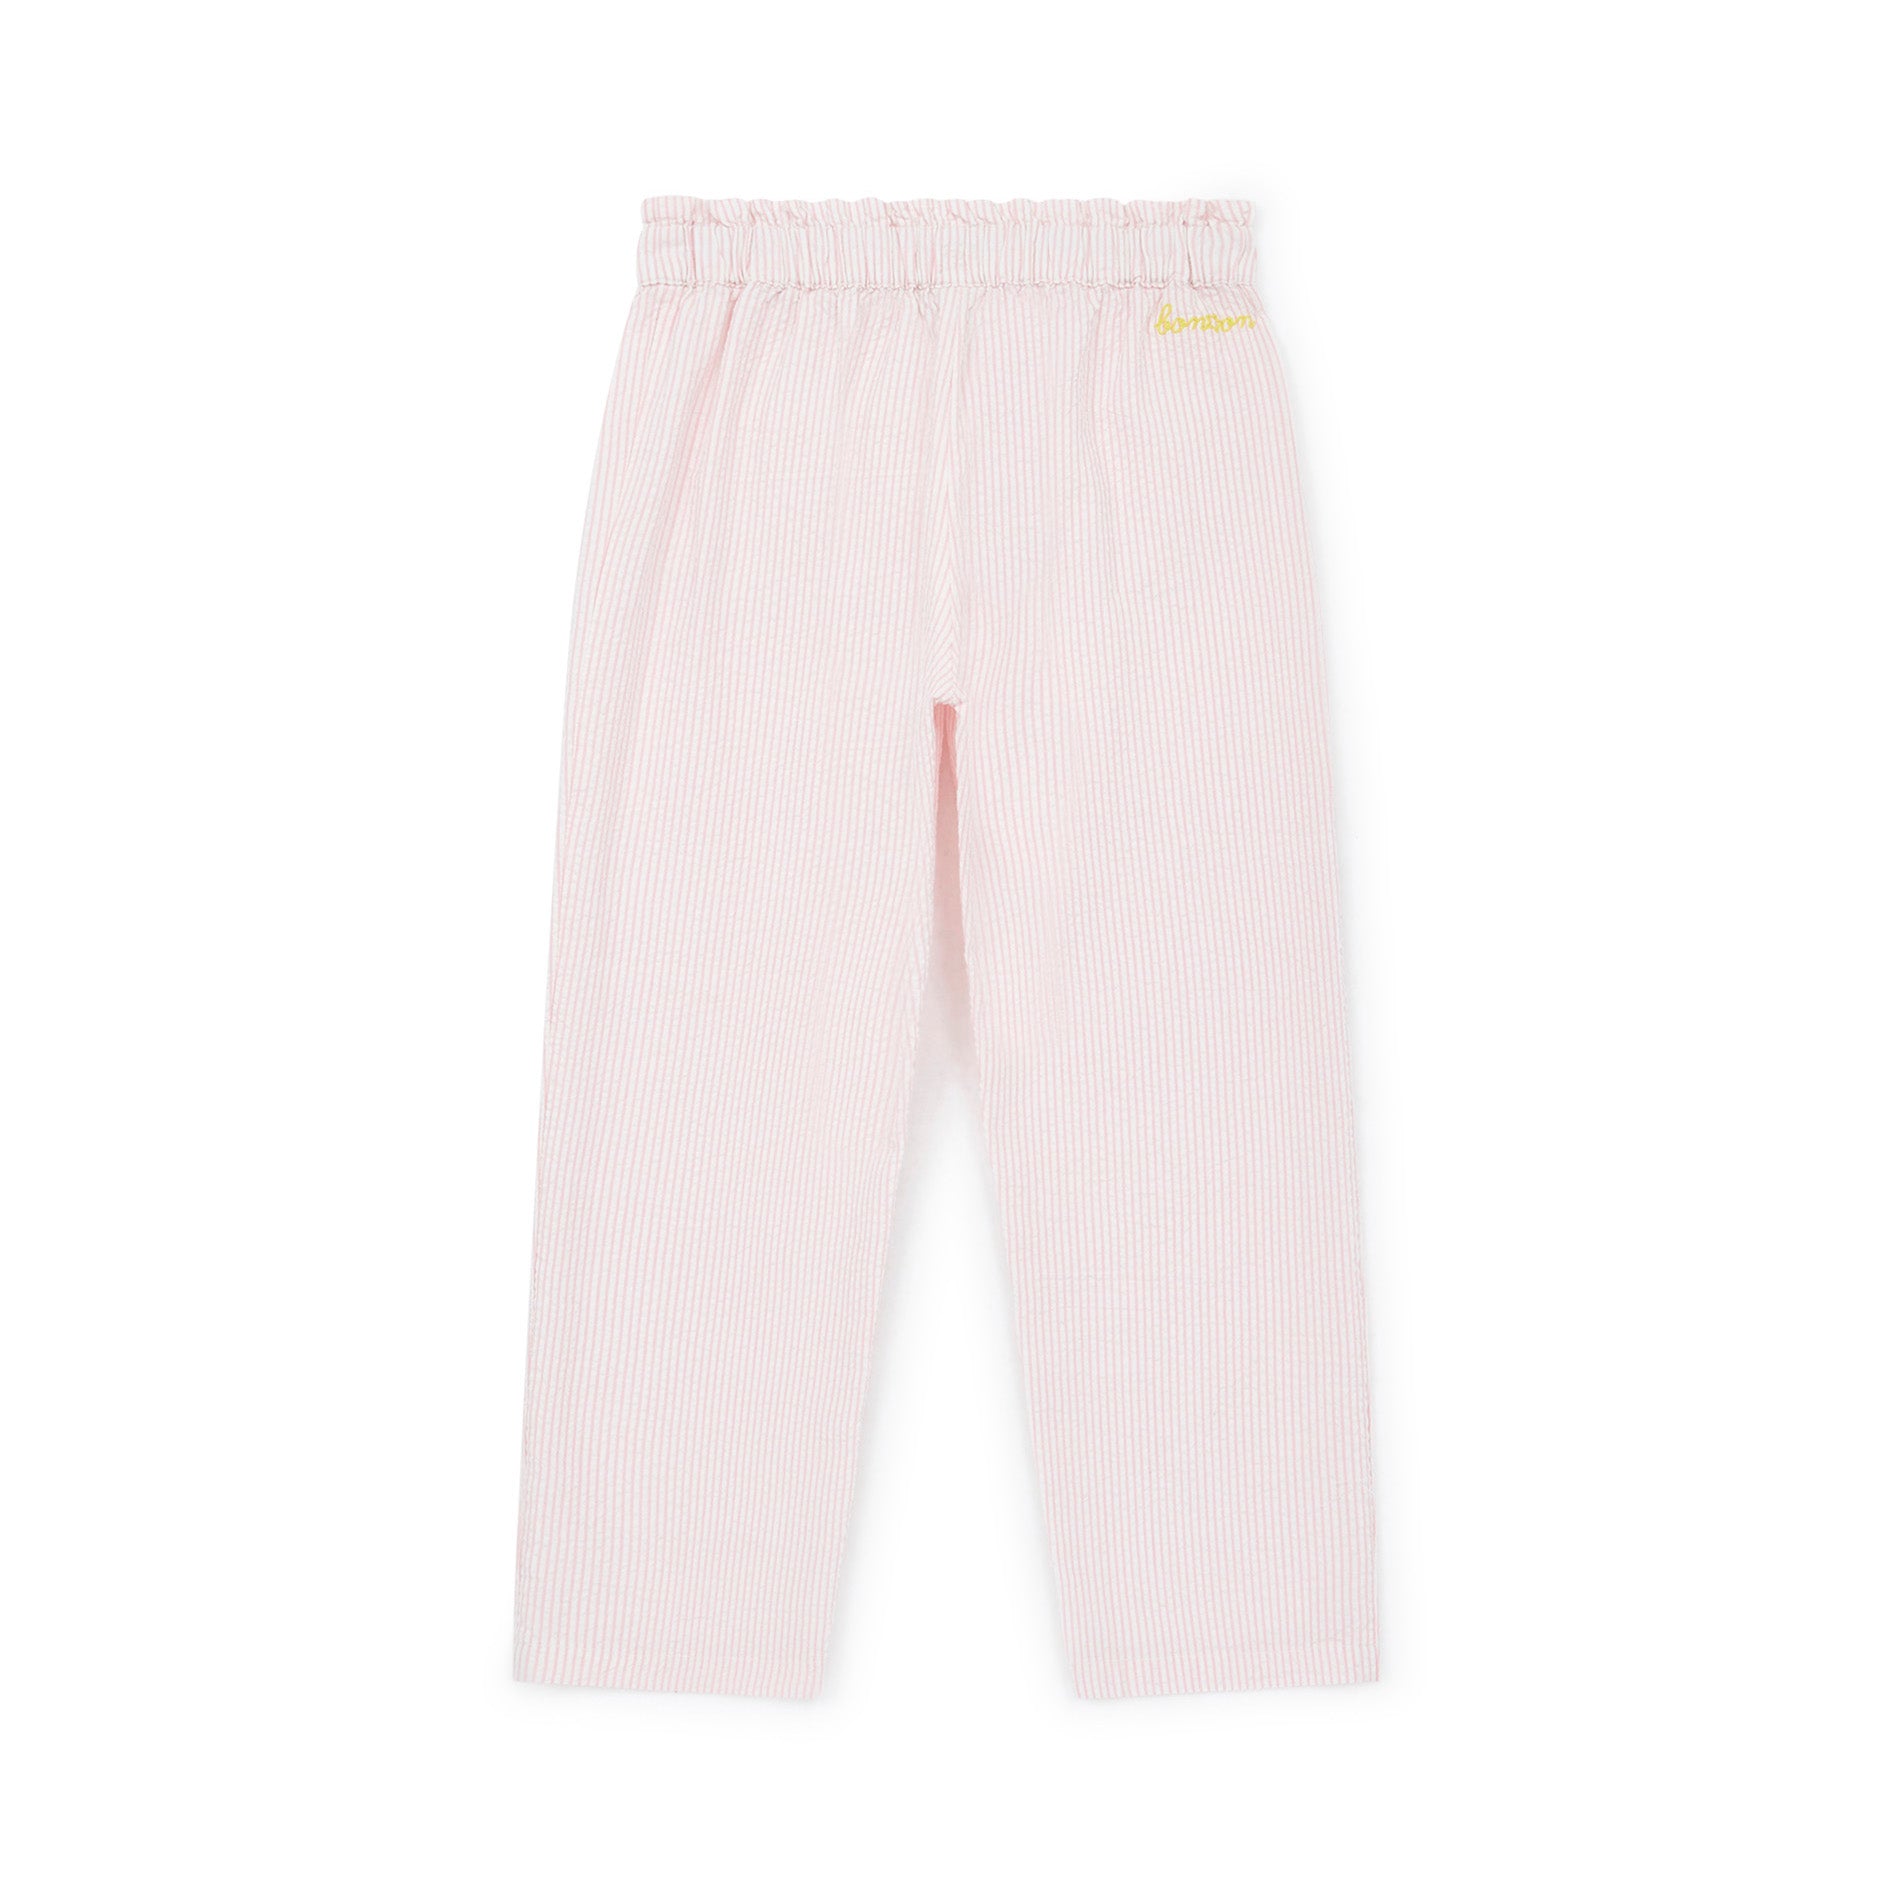 Girls Pink Stripes Cotton Trousers